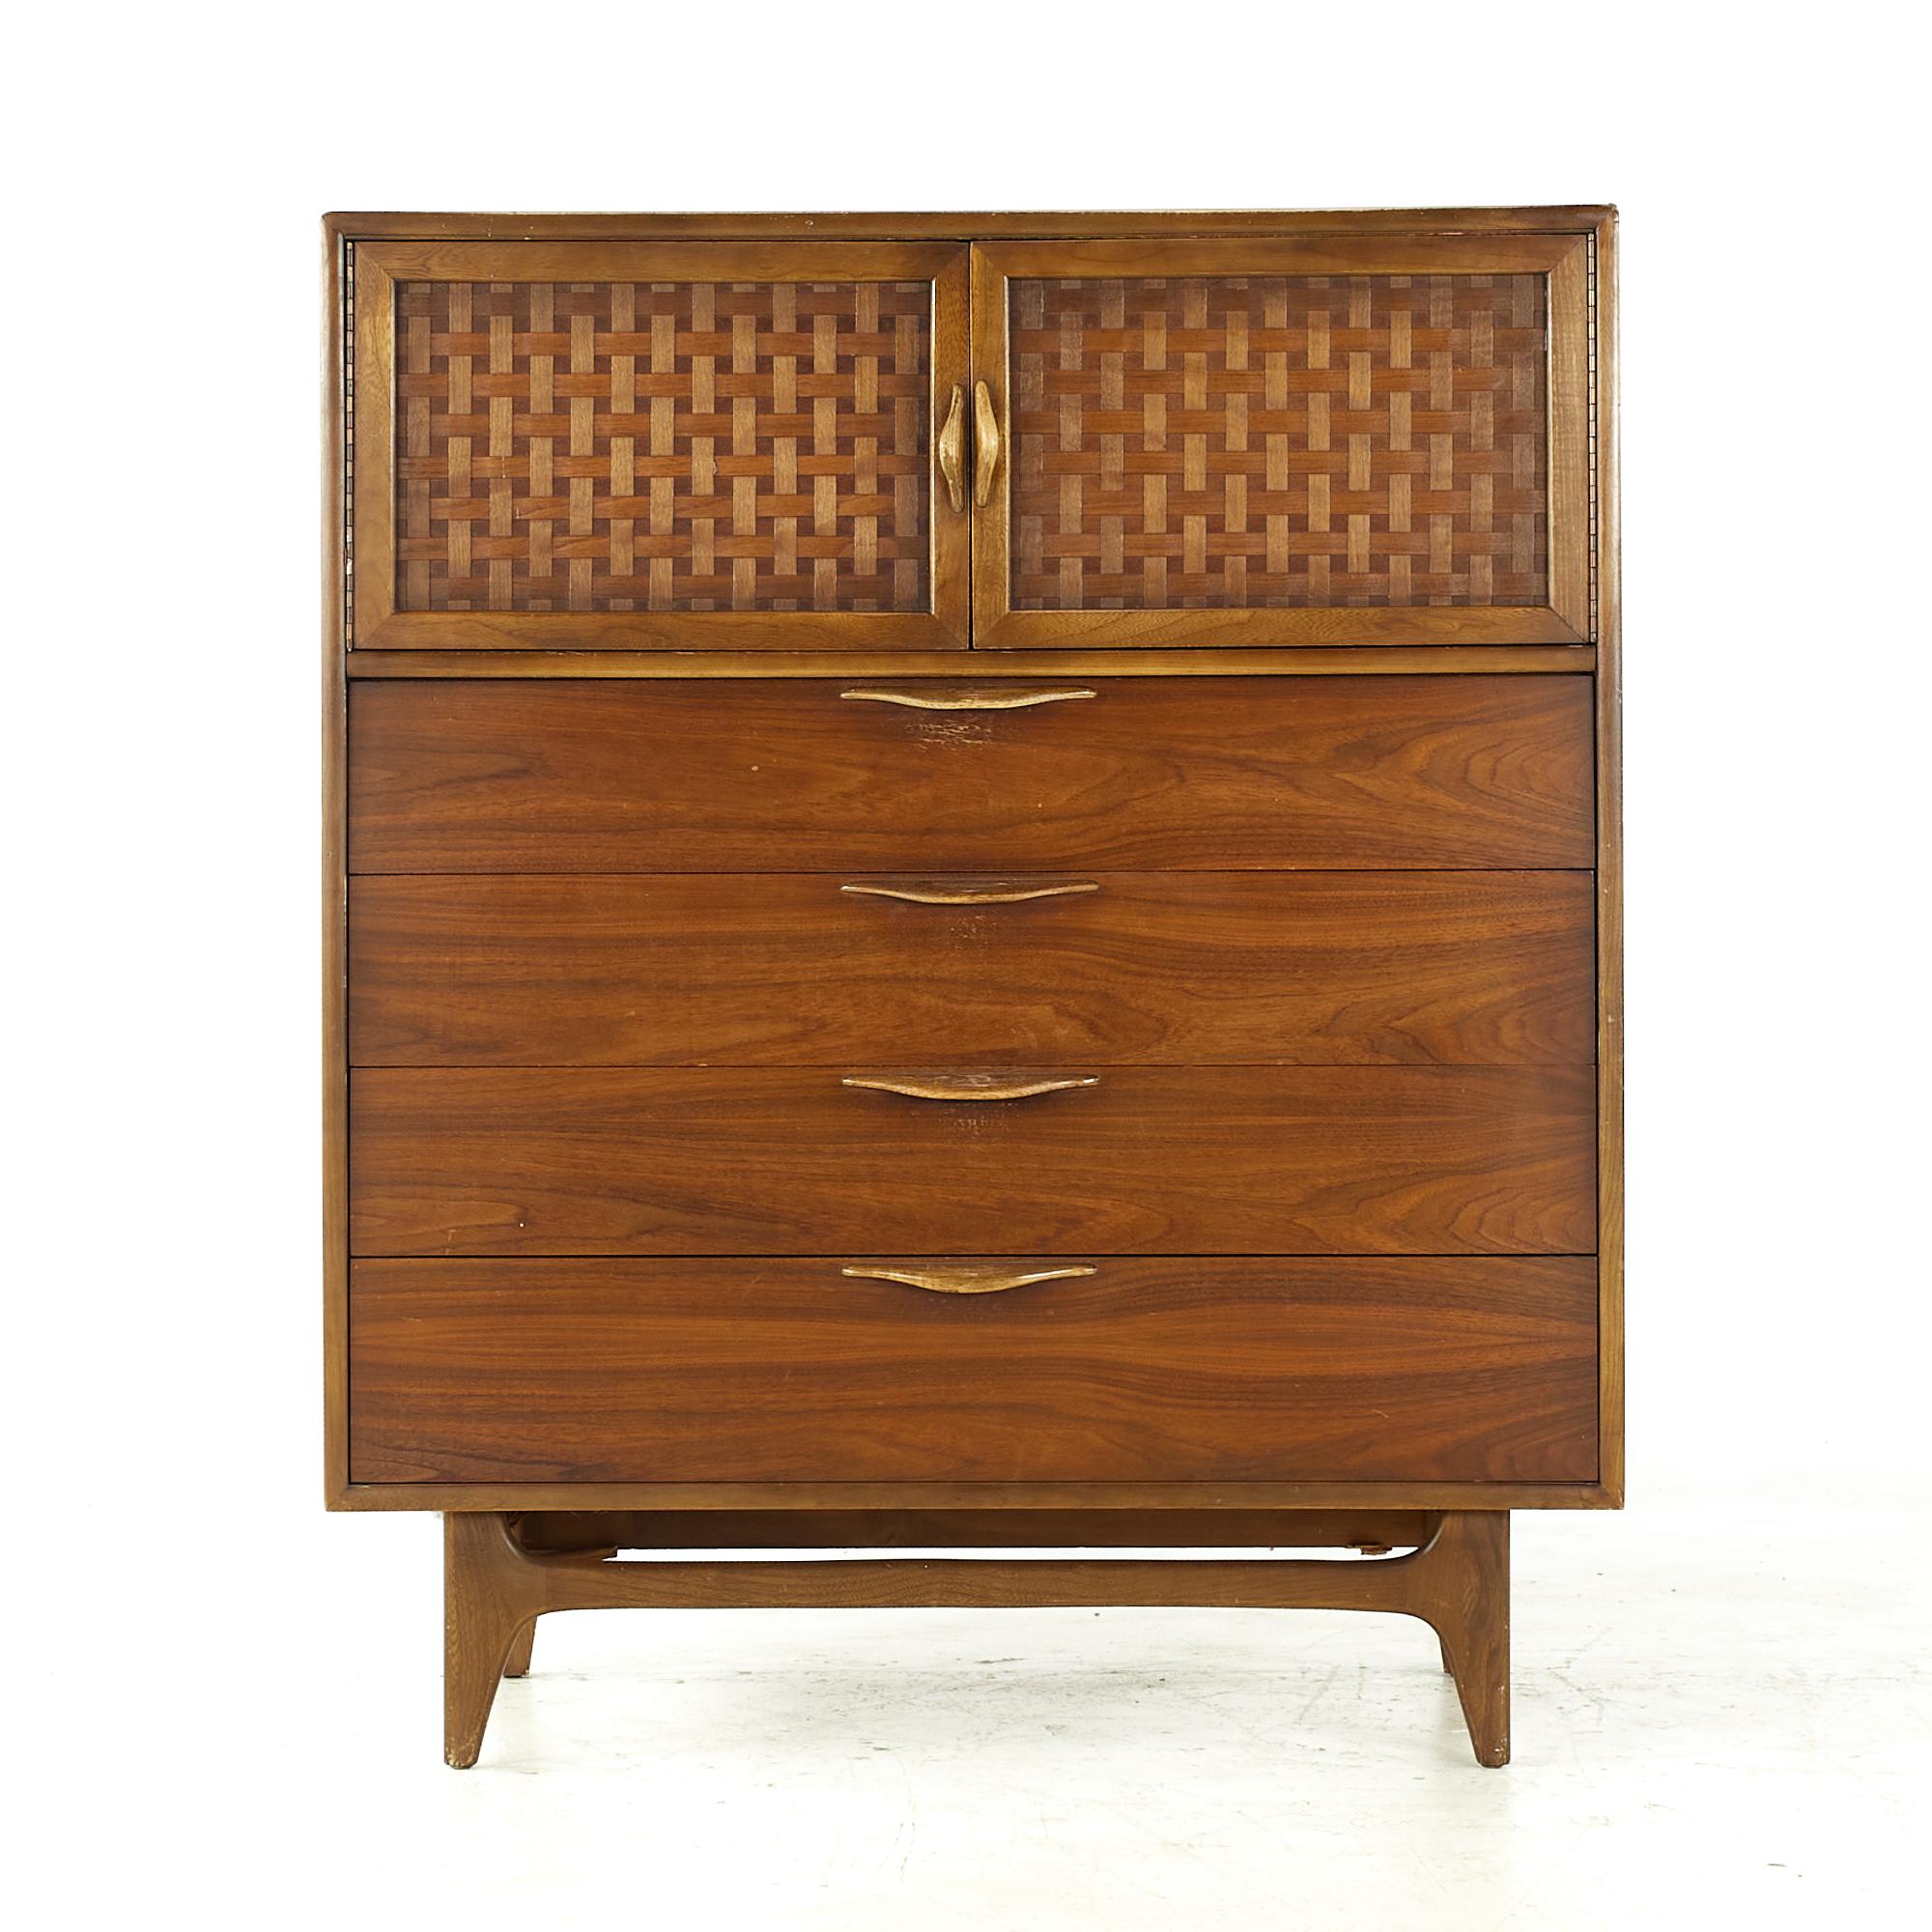 Lane Perception midcentury Walnut Highboy Dresser

This highboy measures: 40 wide x 19 deep x 48.25 inches high

All pieces of furniture can be had in what we call restored vintage condition. That means the piece is restored upon purchase so